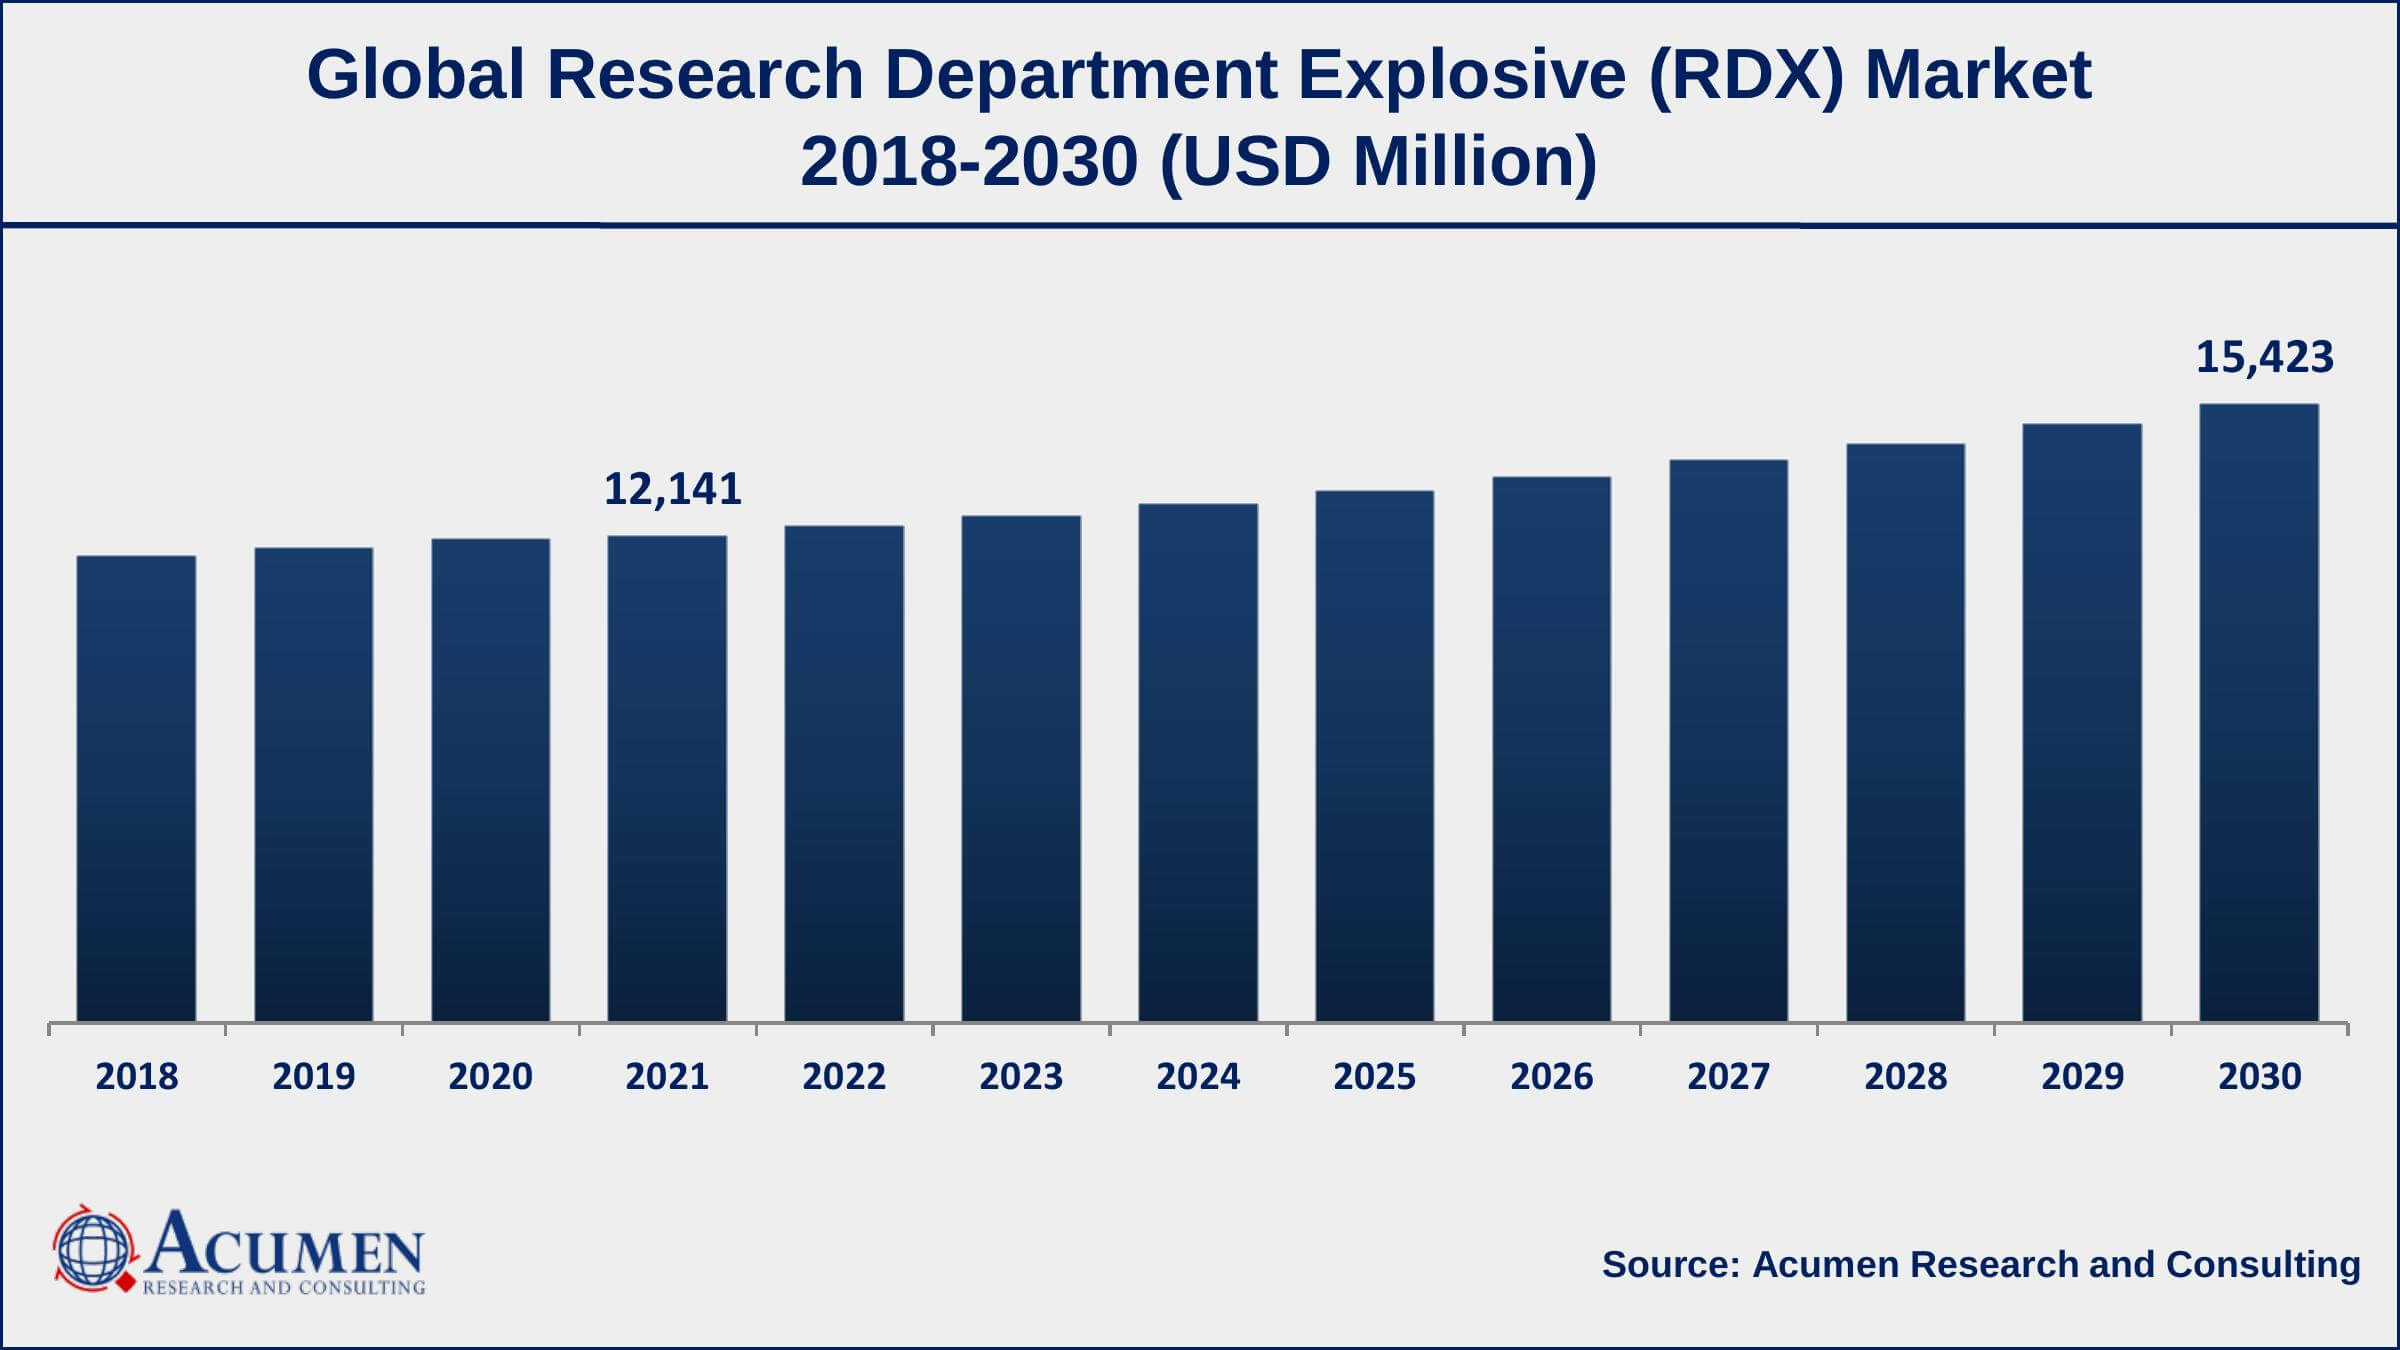 Asia-Pacific RDX market growth will observe highest CAGR from 2022 to 2030